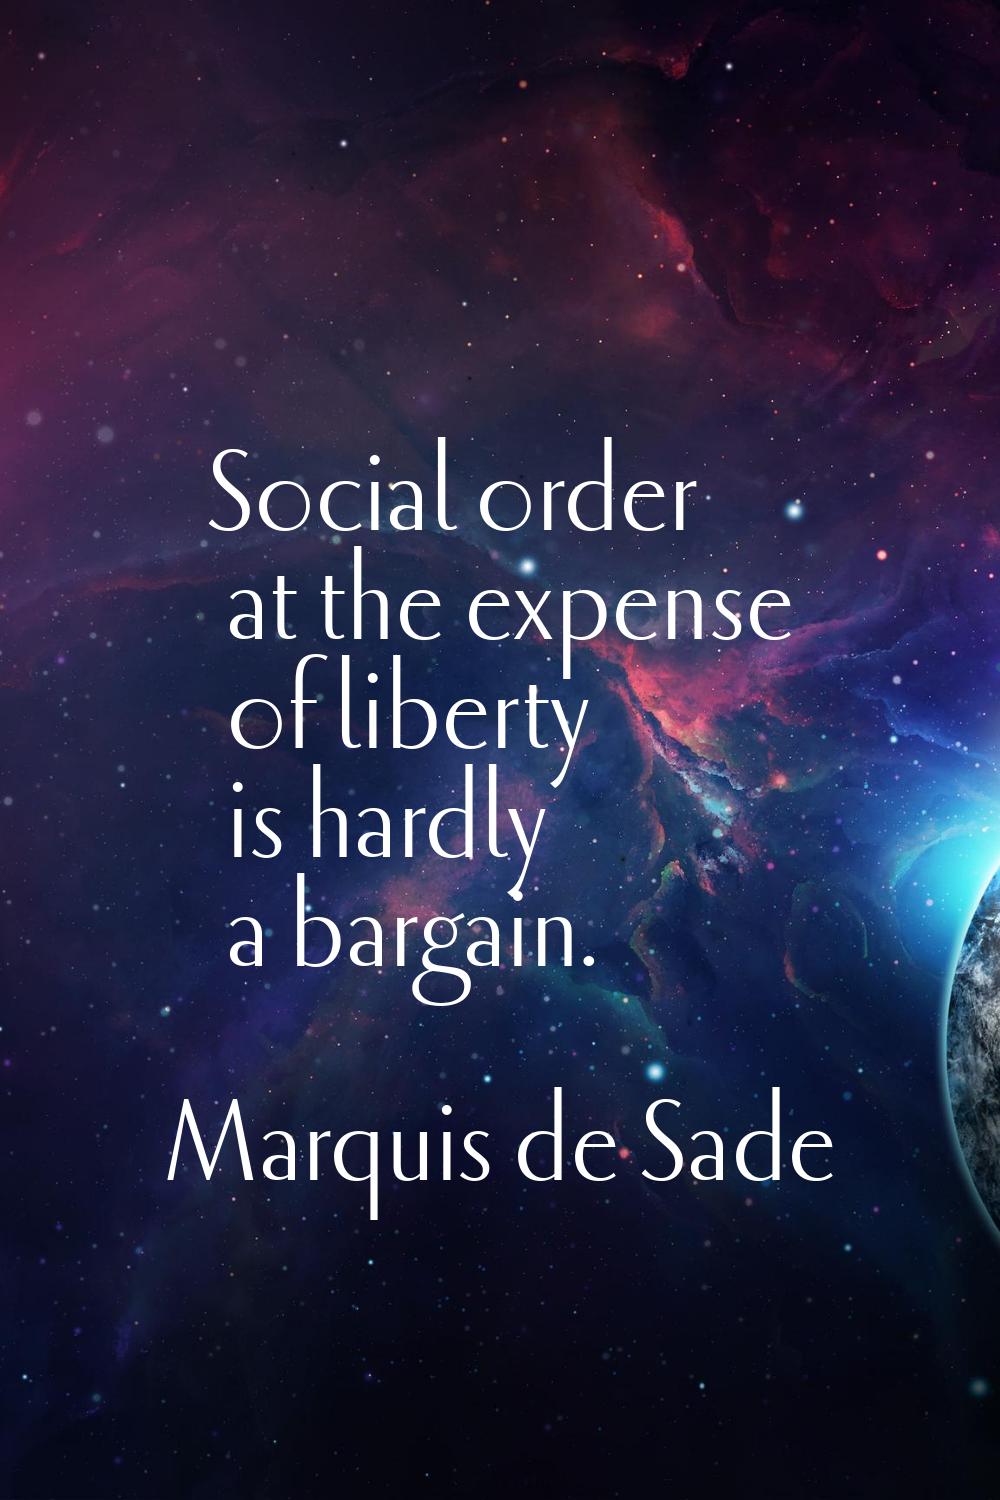 Social order at the expense of liberty is hardly a bargain.